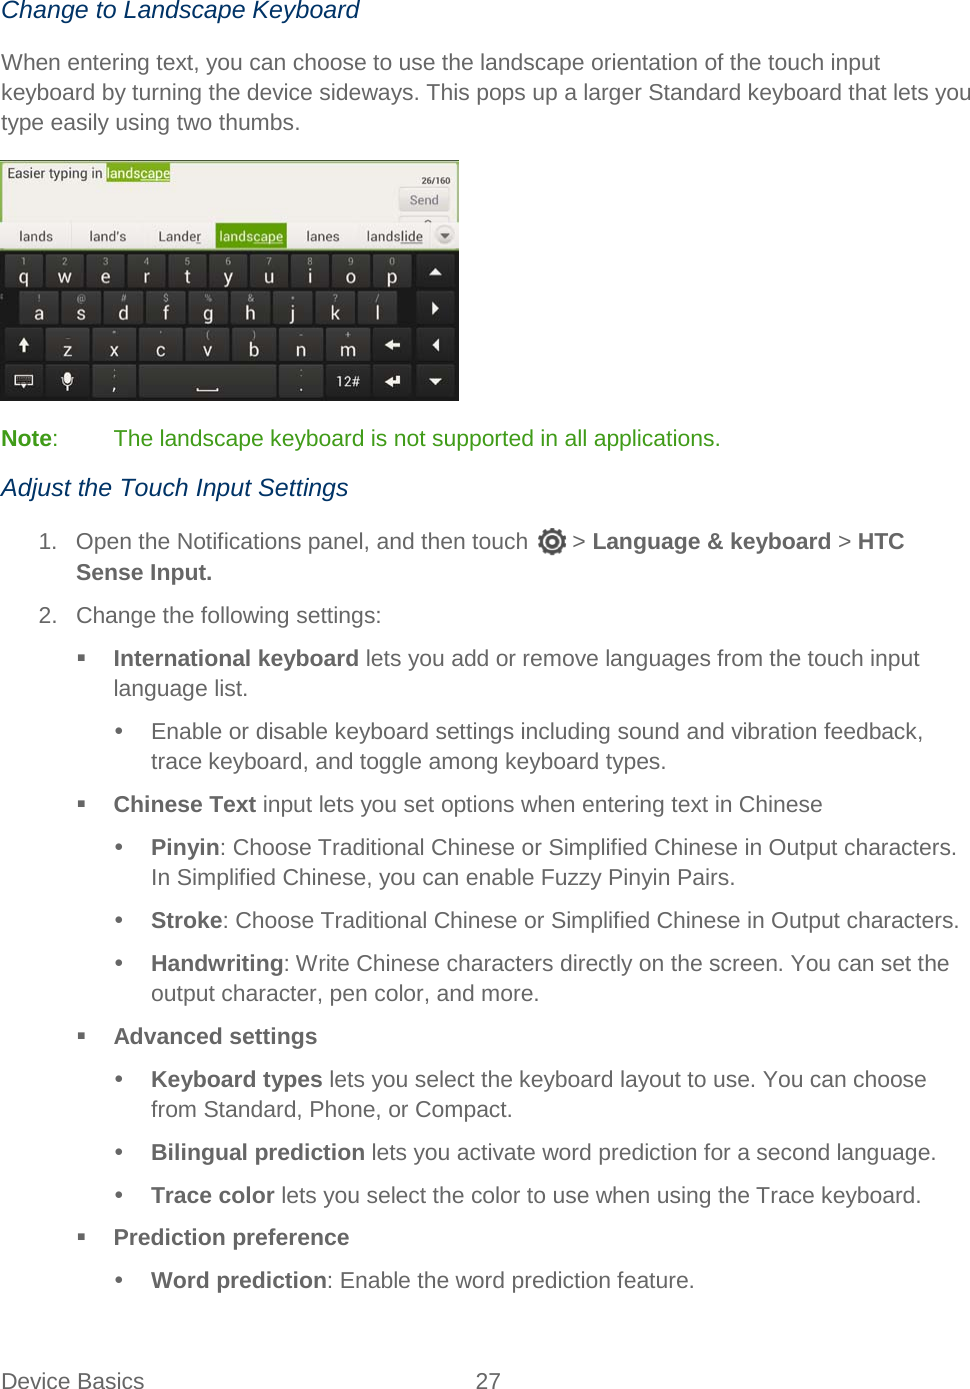  Device Basics 27   Change to Landscape Keyboard When entering text, you can choose to use the landscape orientation of the touch input keyboard by turning the device sideways. This pops up a larger Standard keyboard that lets you type easily using two thumbs.  Note:  The landscape keyboard is not supported in all applications. Adjust the Touch Input Settings 1. Open the Notifications panel, and then touch  &gt; Language &amp; keyboard &gt; HTC Sense Input. 2. Change the following settings:  International keyboard lets you add or remove languages from the touch input language list.  Enable or disable keyboard settings including sound and vibration feedback, trace keyboard, and toggle among keyboard types.  Chinese Text input lets you set options when entering text in Chinese  Pinyin: Choose Traditional Chinese or Simplified Chinese in Output characters. In Simplified Chinese, you can enable Fuzzy Pinyin Pairs.  Stroke: Choose Traditional Chinese or Simplified Chinese in Output characters.  Handwriting: Write Chinese characters directly on the screen. You can set the output character, pen color, and more.  Advanced settings  Keyboard types lets you select the keyboard layout to use. You can choose from Standard, Phone, or Compact.  Bilingual prediction lets you activate word prediction for a second language.  Trace color lets you select the color to use when using the Trace keyboard.  Prediction preference  Word prediction: Enable the word prediction feature. 